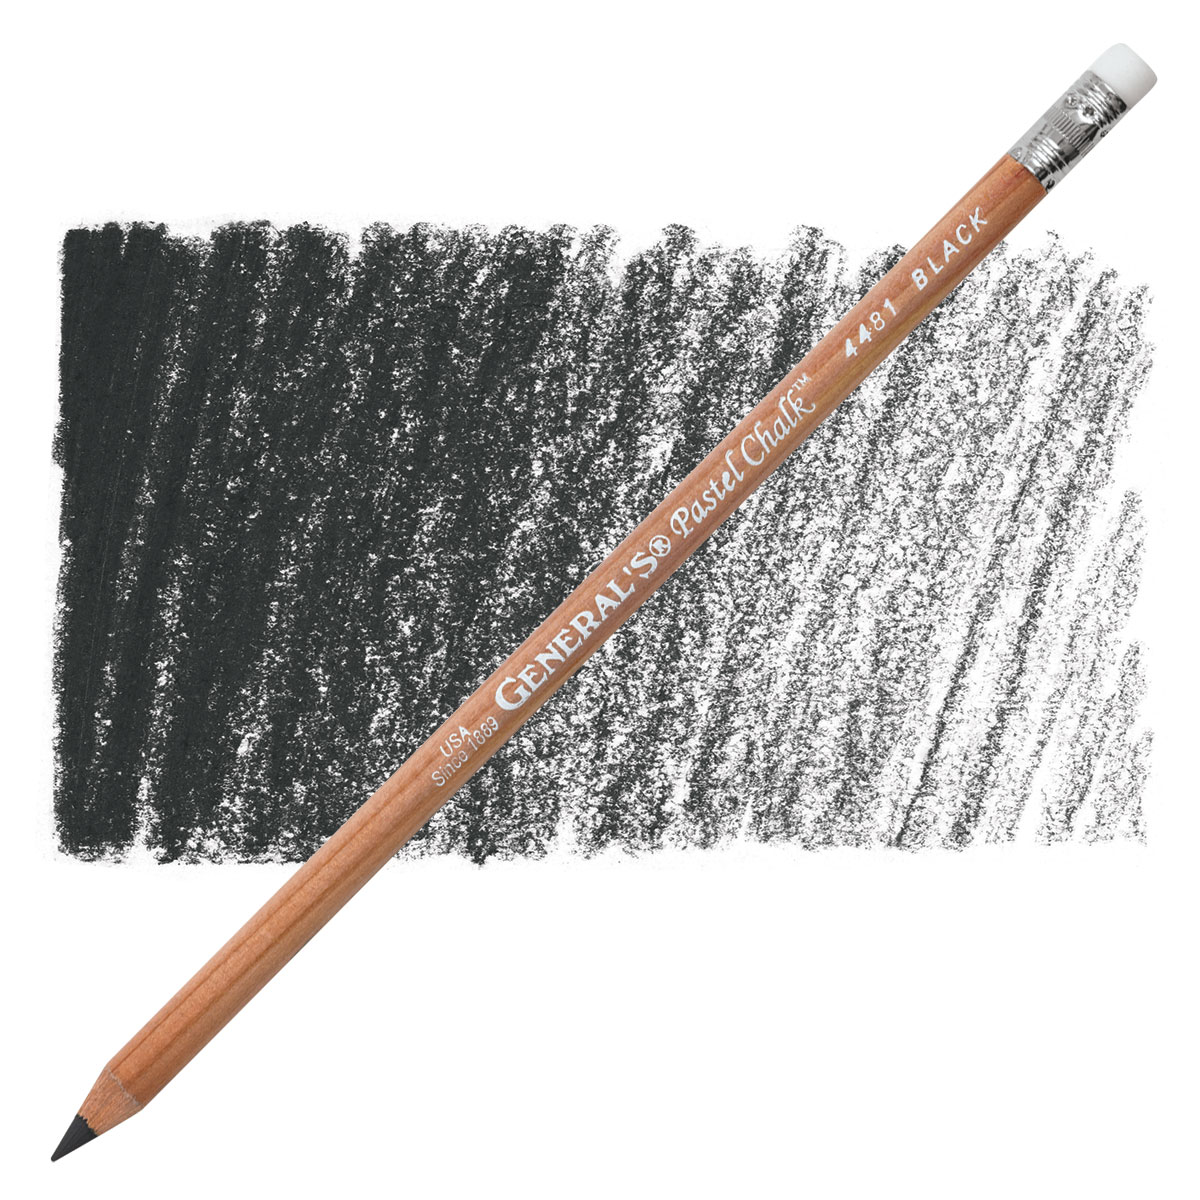 MultiPastel White Chalk Pencil Set of 2 - Brushes and More